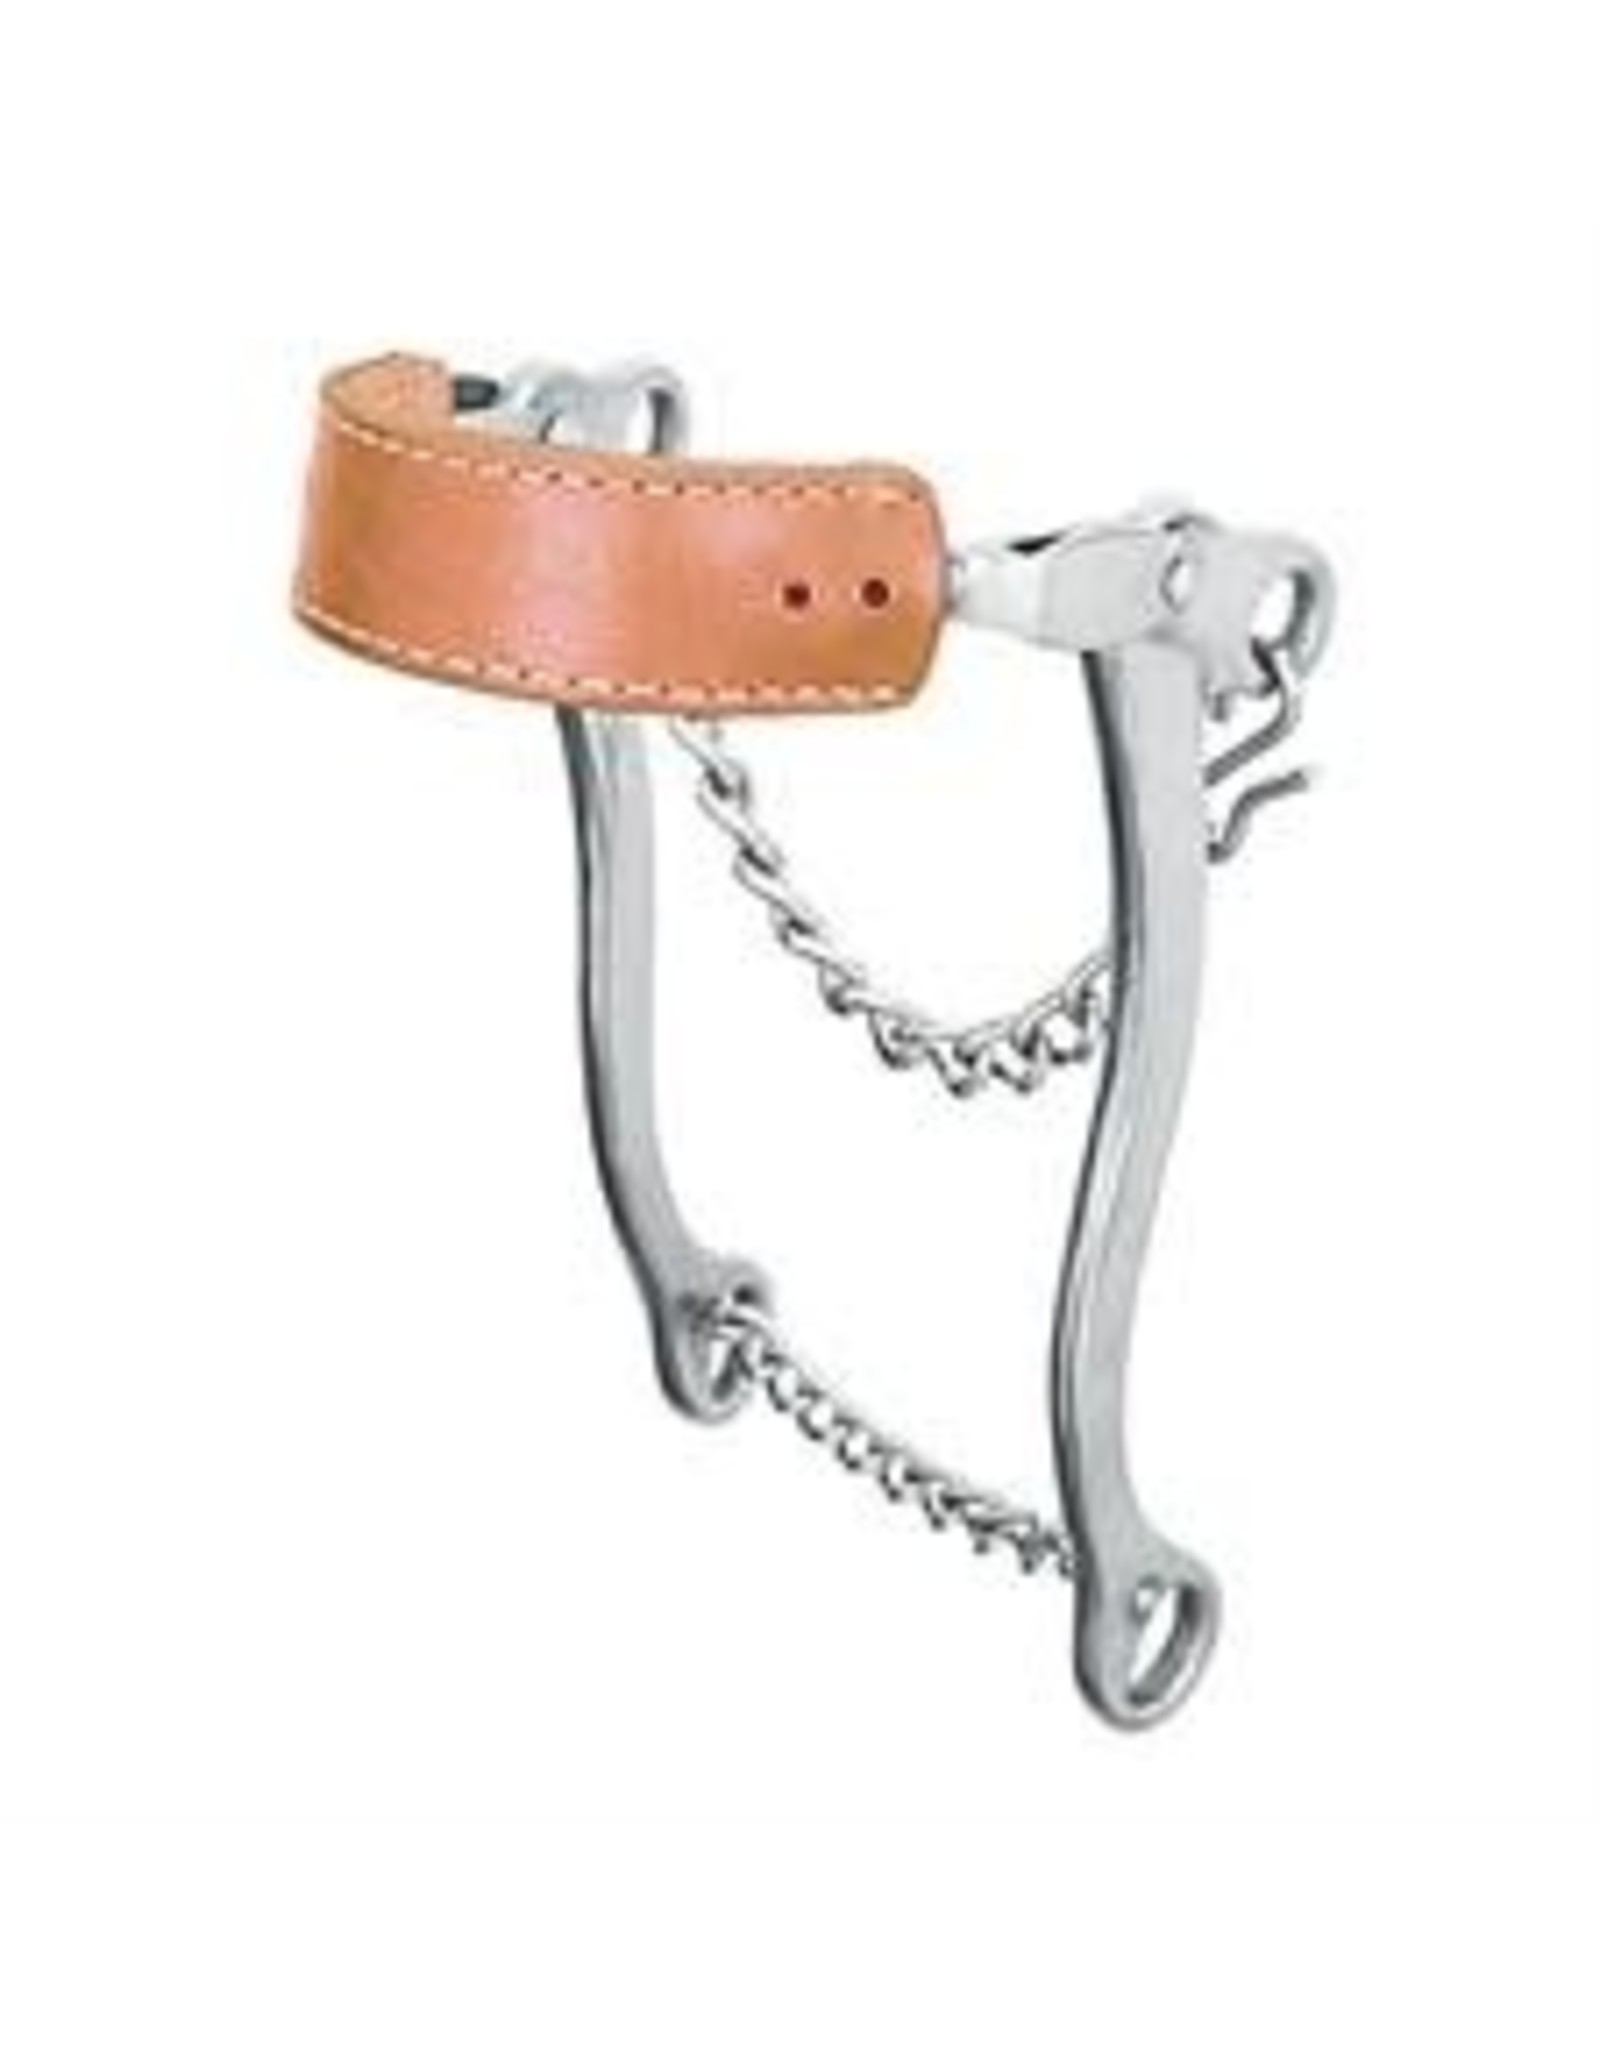 BIT* Hackamore Bit Mild Stage1 Metal with Flat Leather Nose Band and Curb Chain 8' Cheeks 25-1360